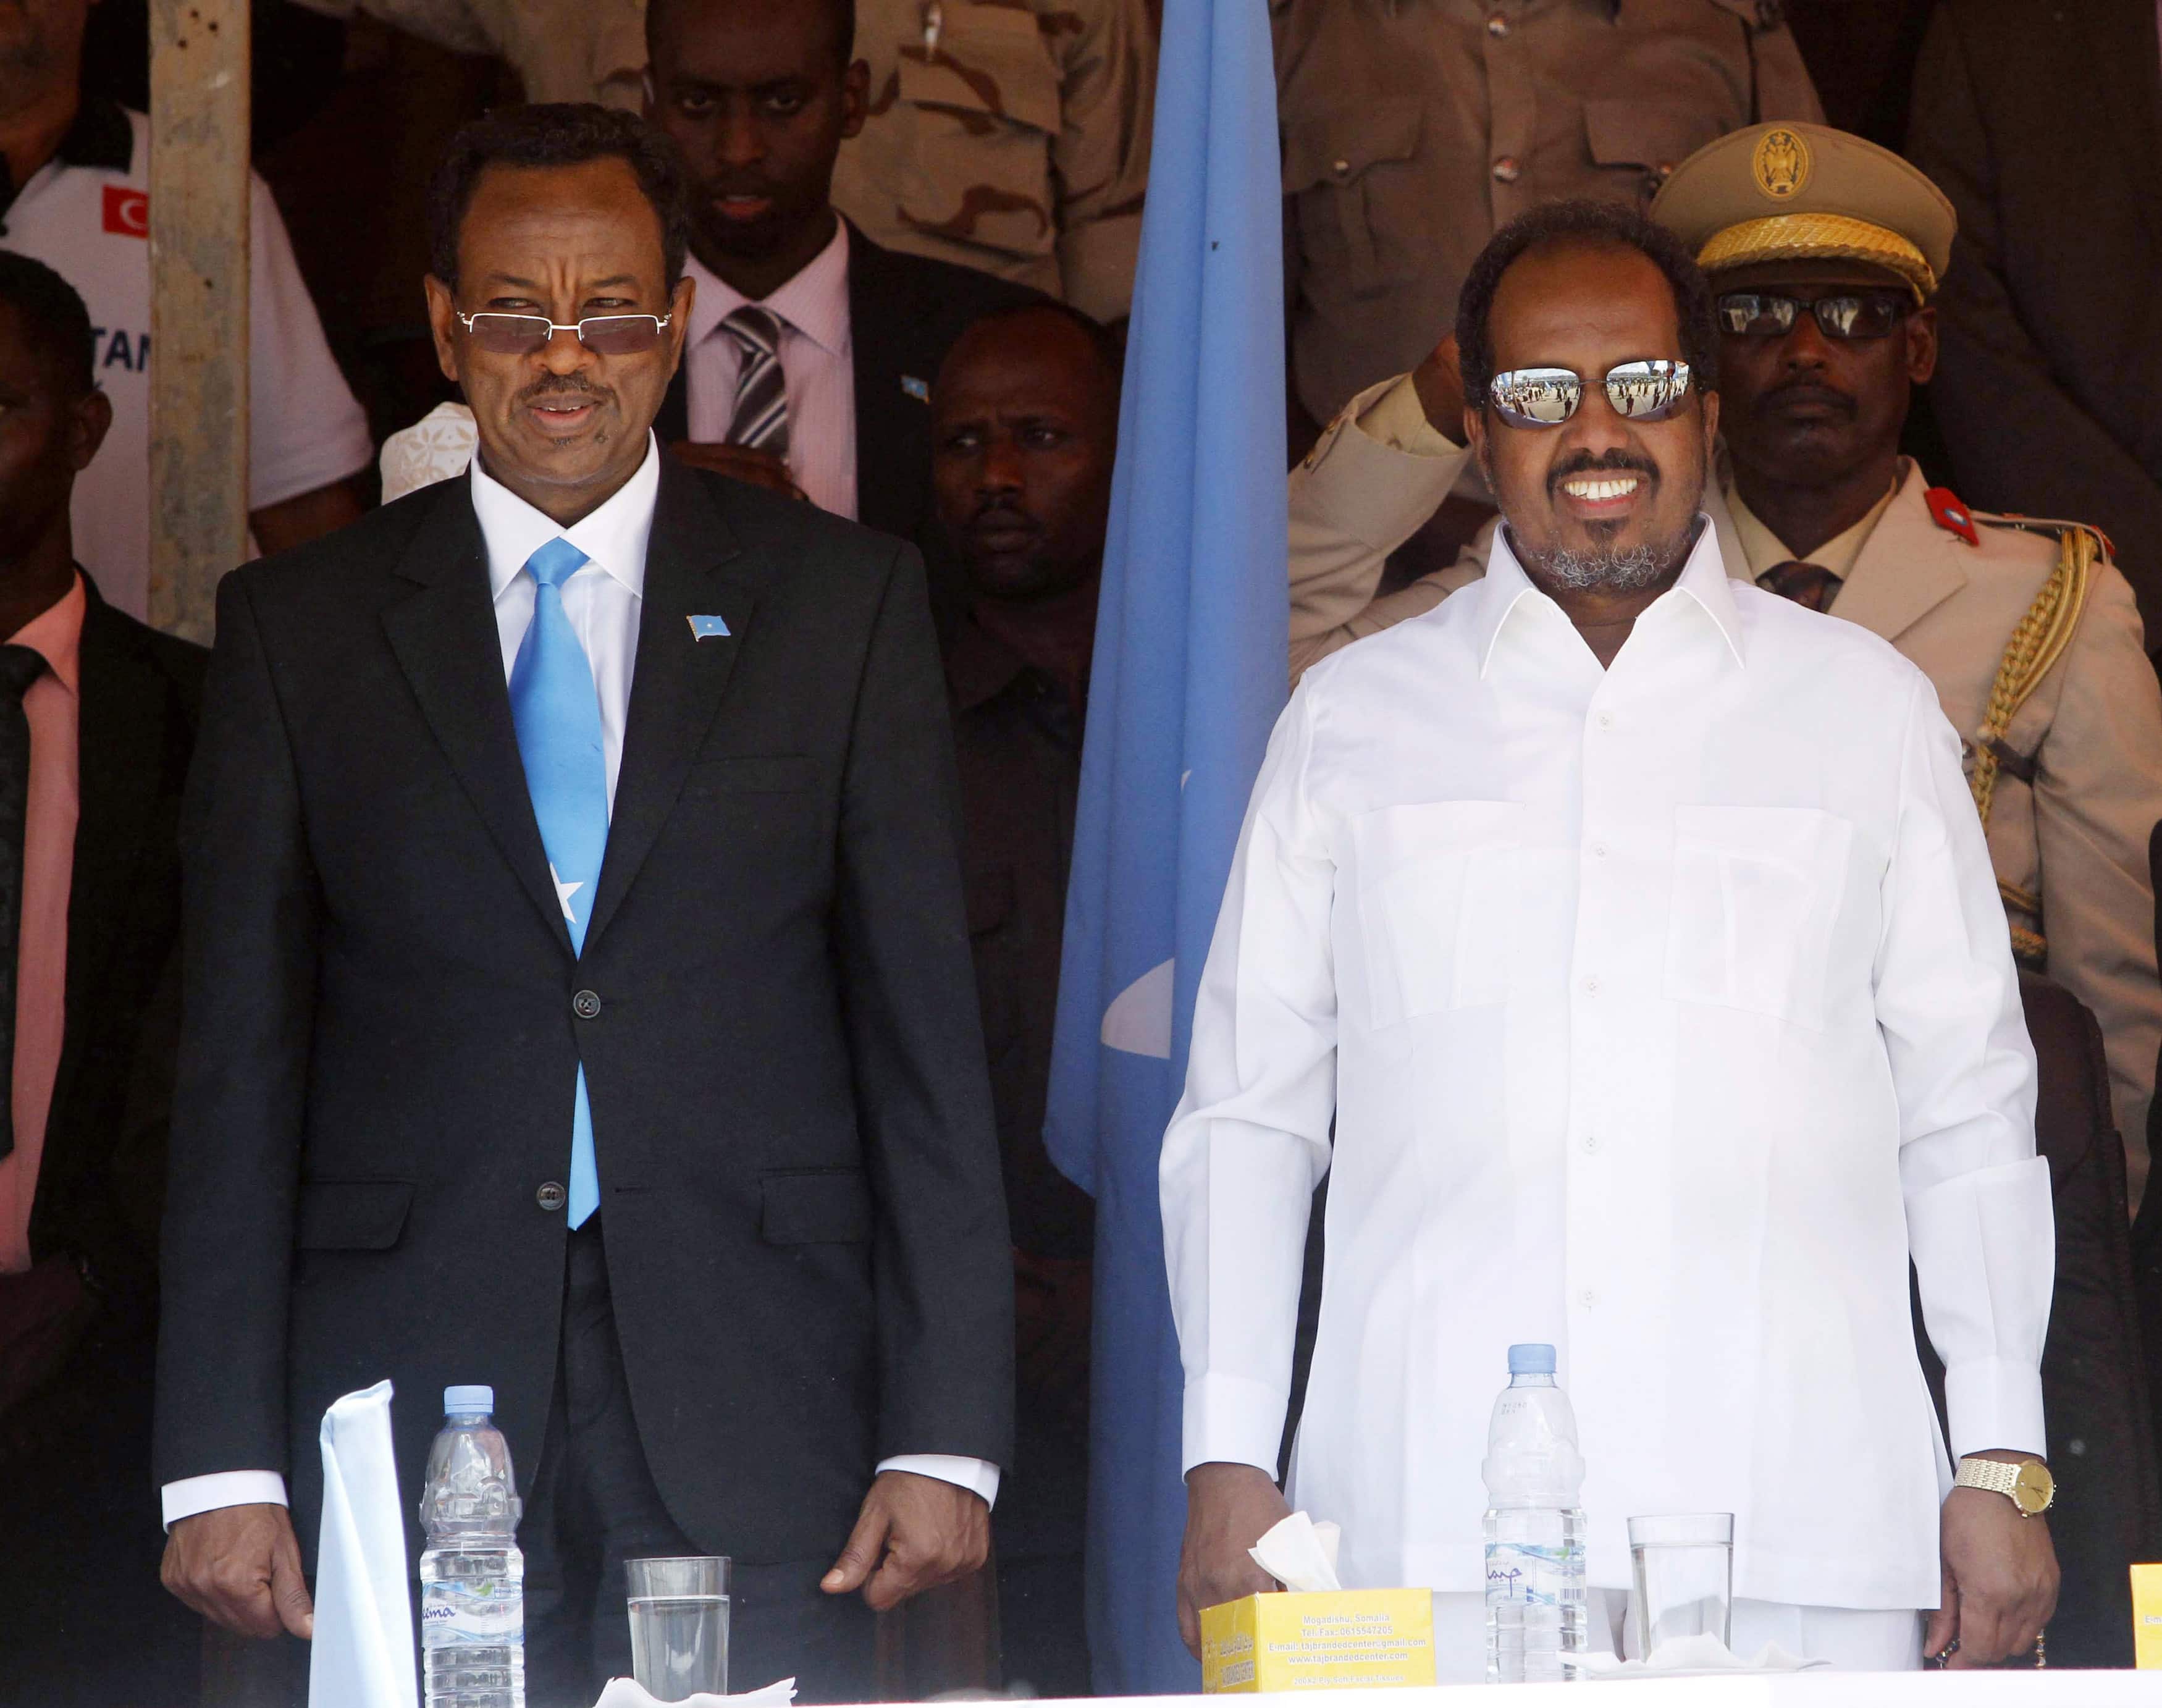 Somalia's Prime Minister Abdi Farah Shirdon Saaid (L) and President Hassan Sheikh Mohamud (R) at an event in Mogadishu July 2013., REUTERS/Feisal Omar